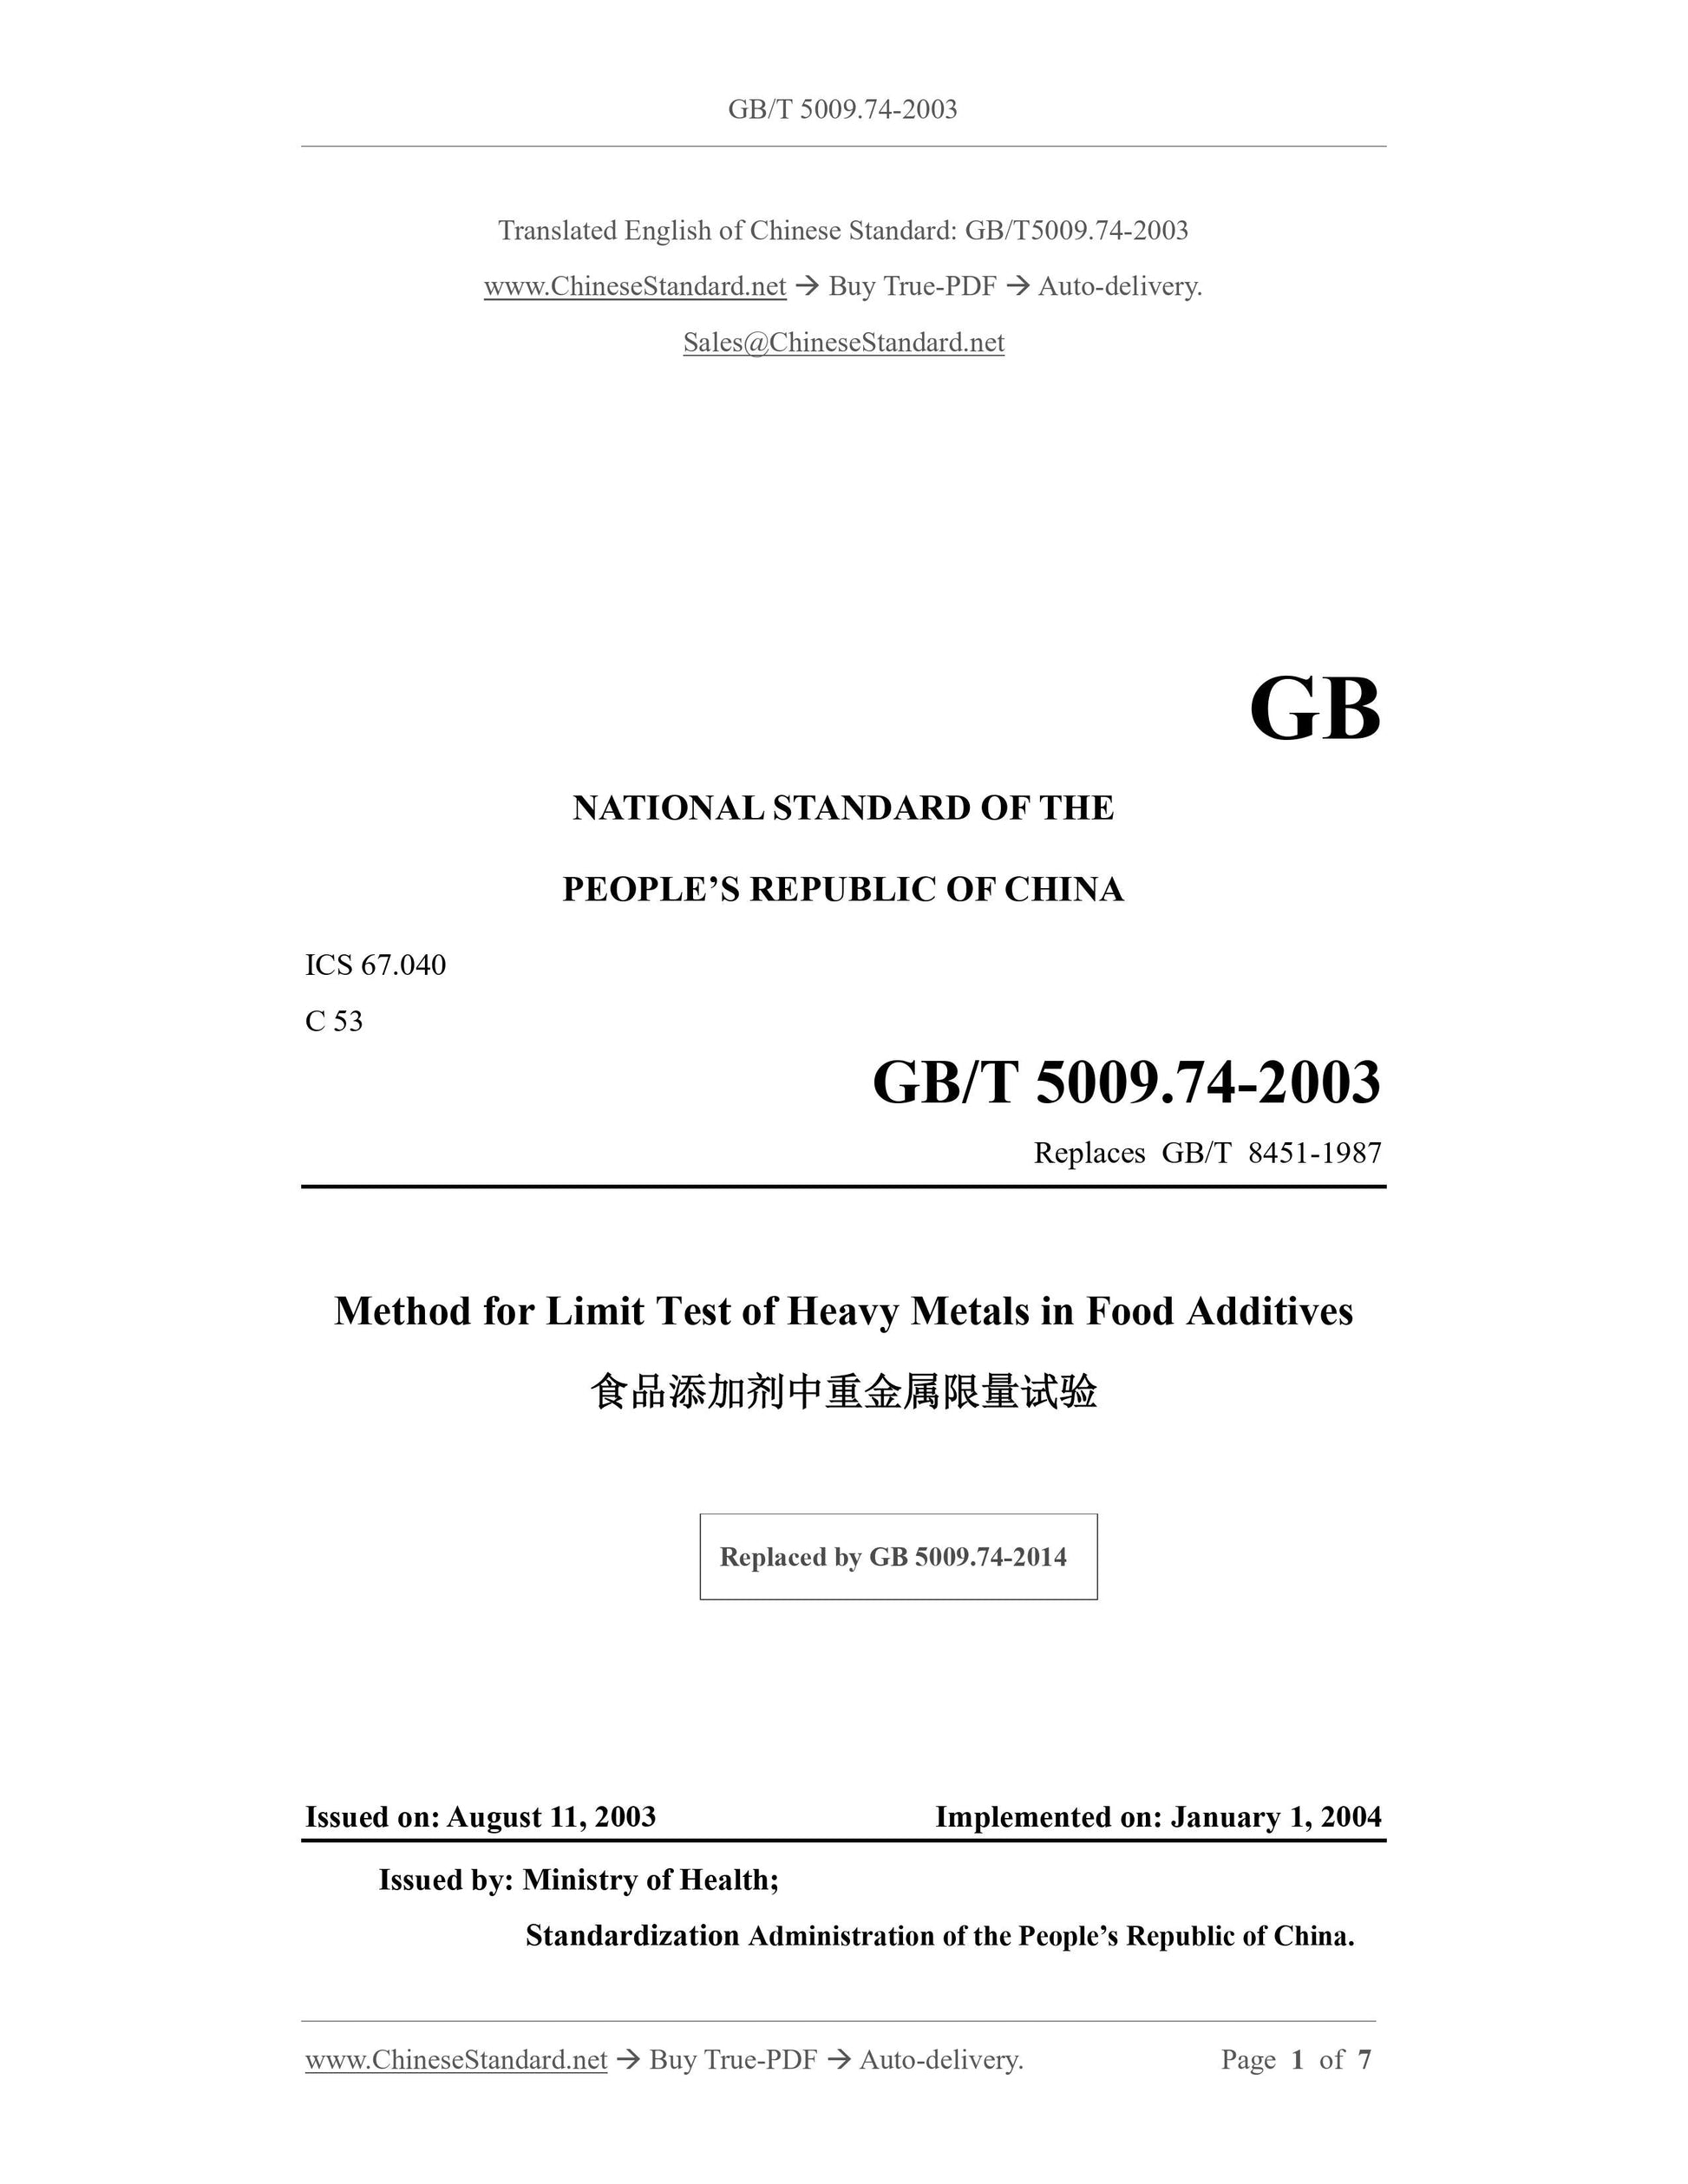 GB/T 5009.74-2003 Page 1